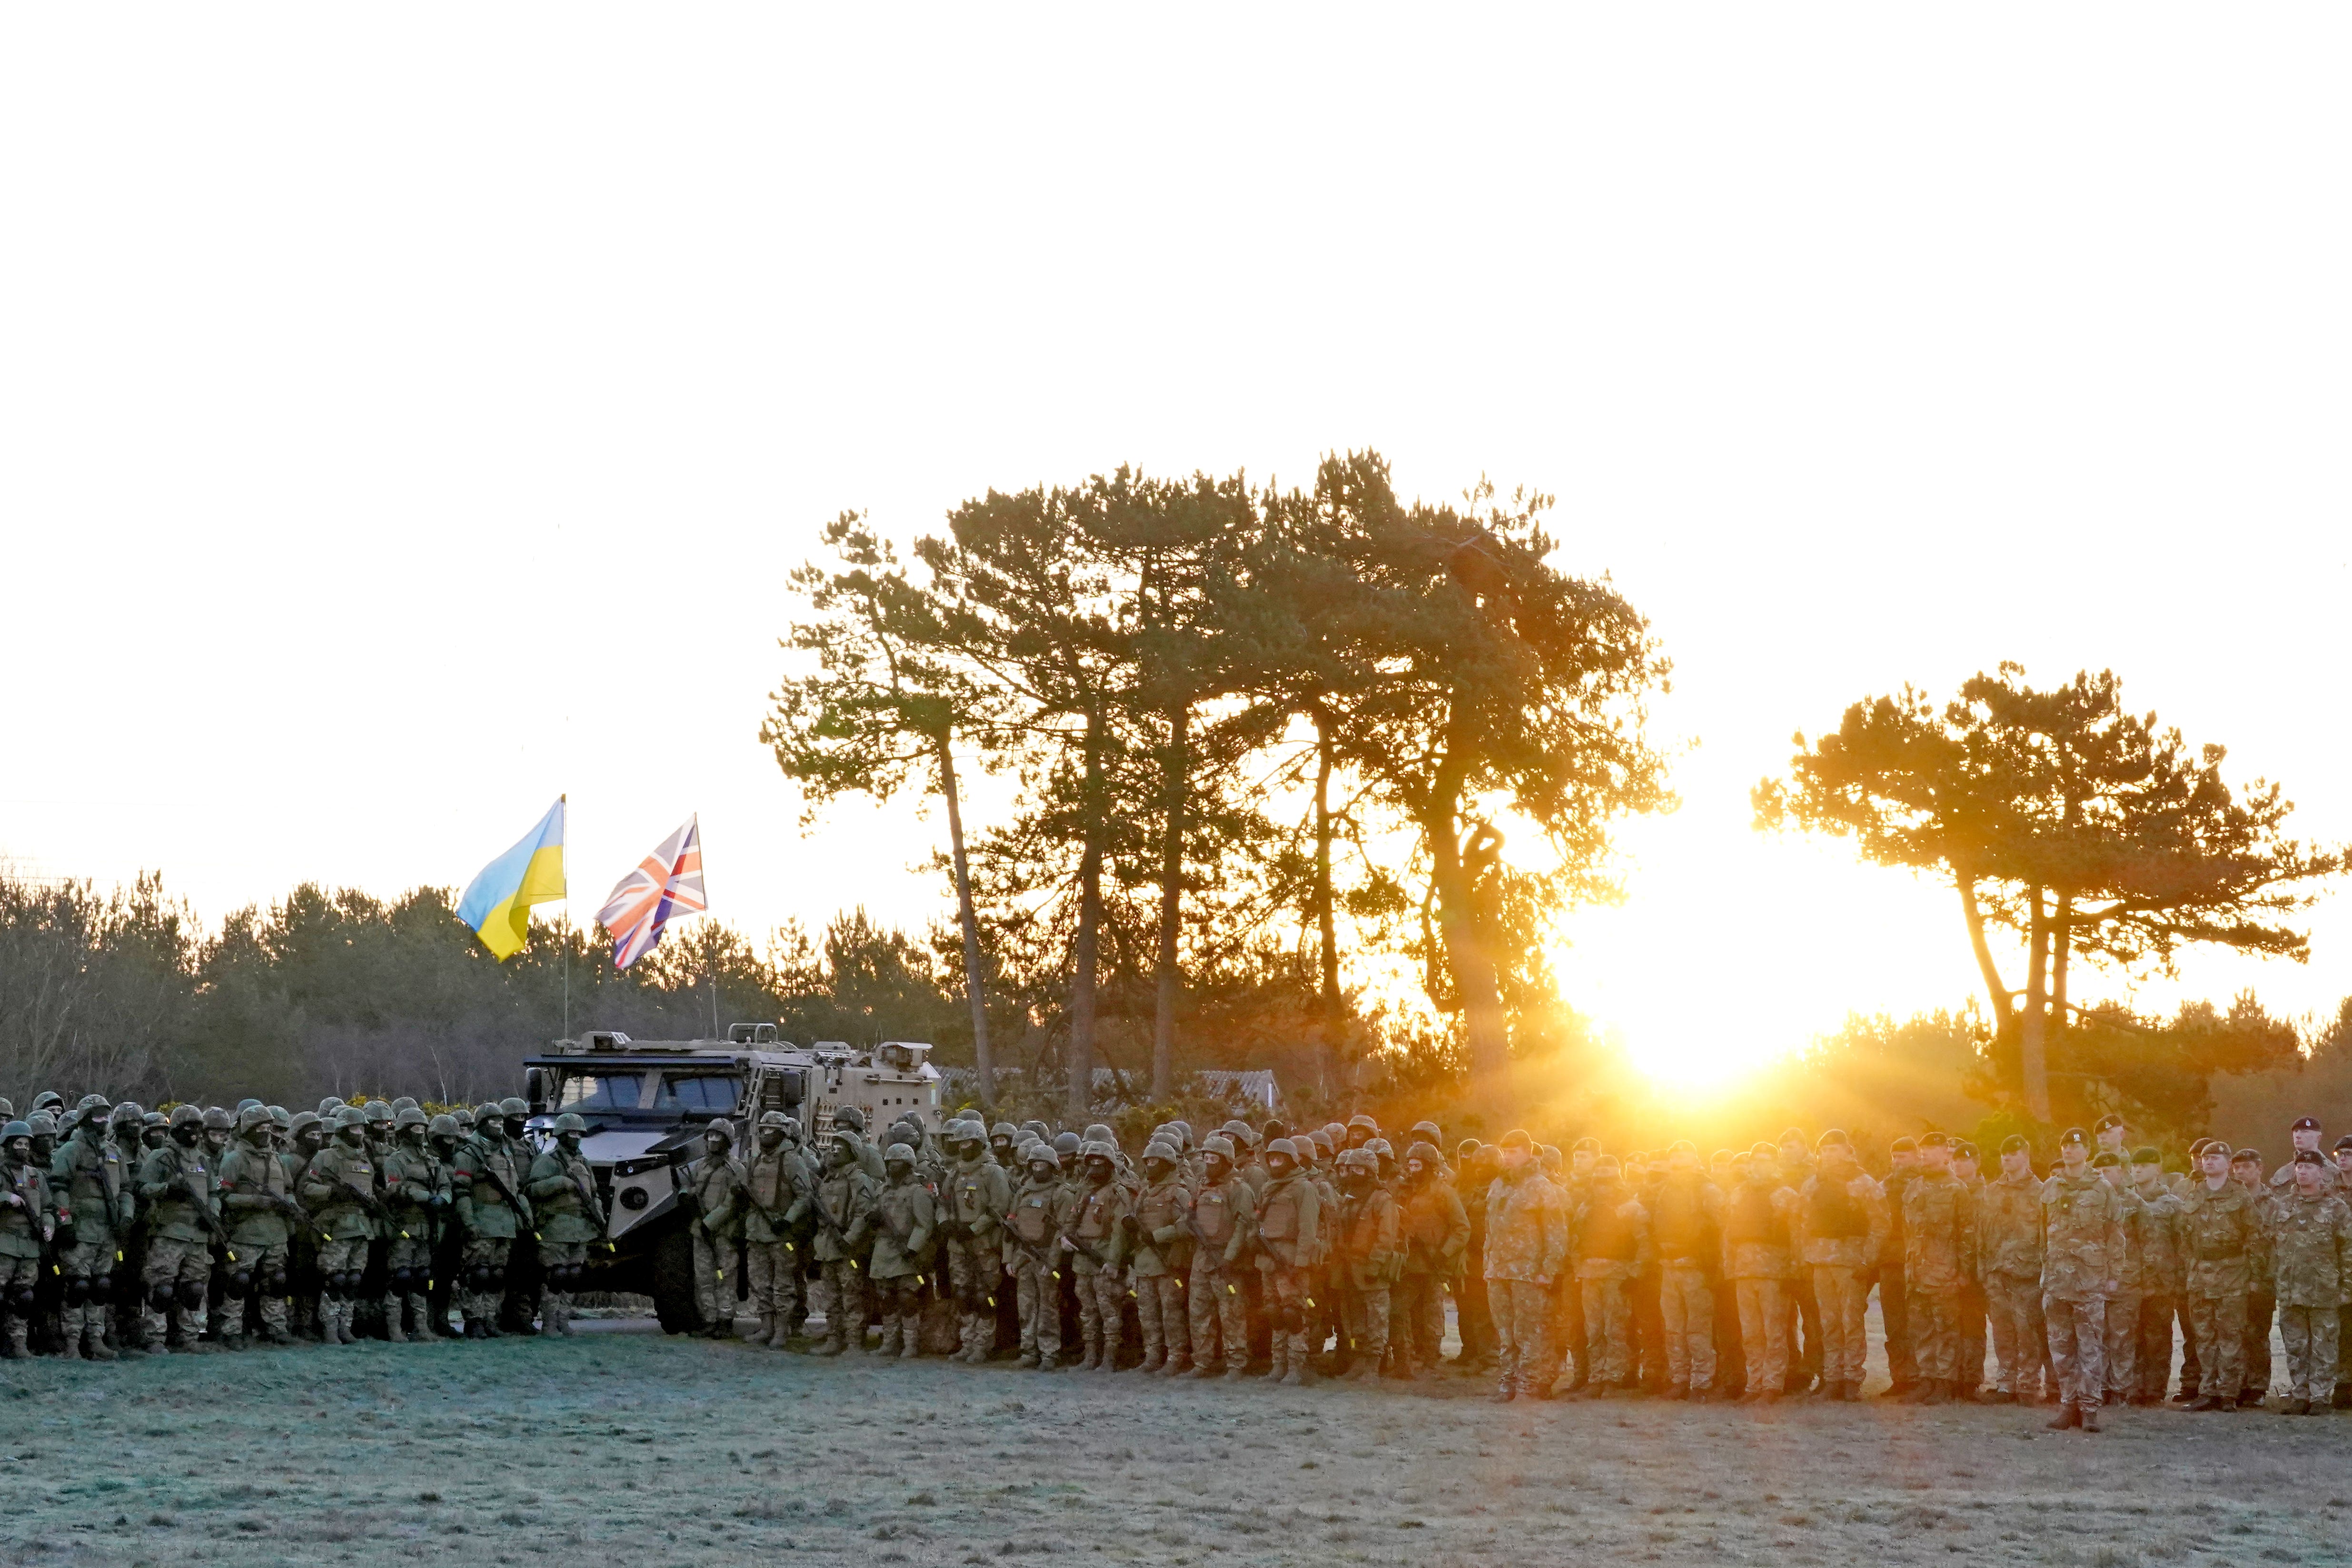 Ukrainian troops and their UK military instructors commemorate lives lost in the Russian invasion of Ukraine during a sunrise commemorative service at an Army camp in the South East to mark the one-year anniversary of the start of the conflict (Gareth Fuller/PA)